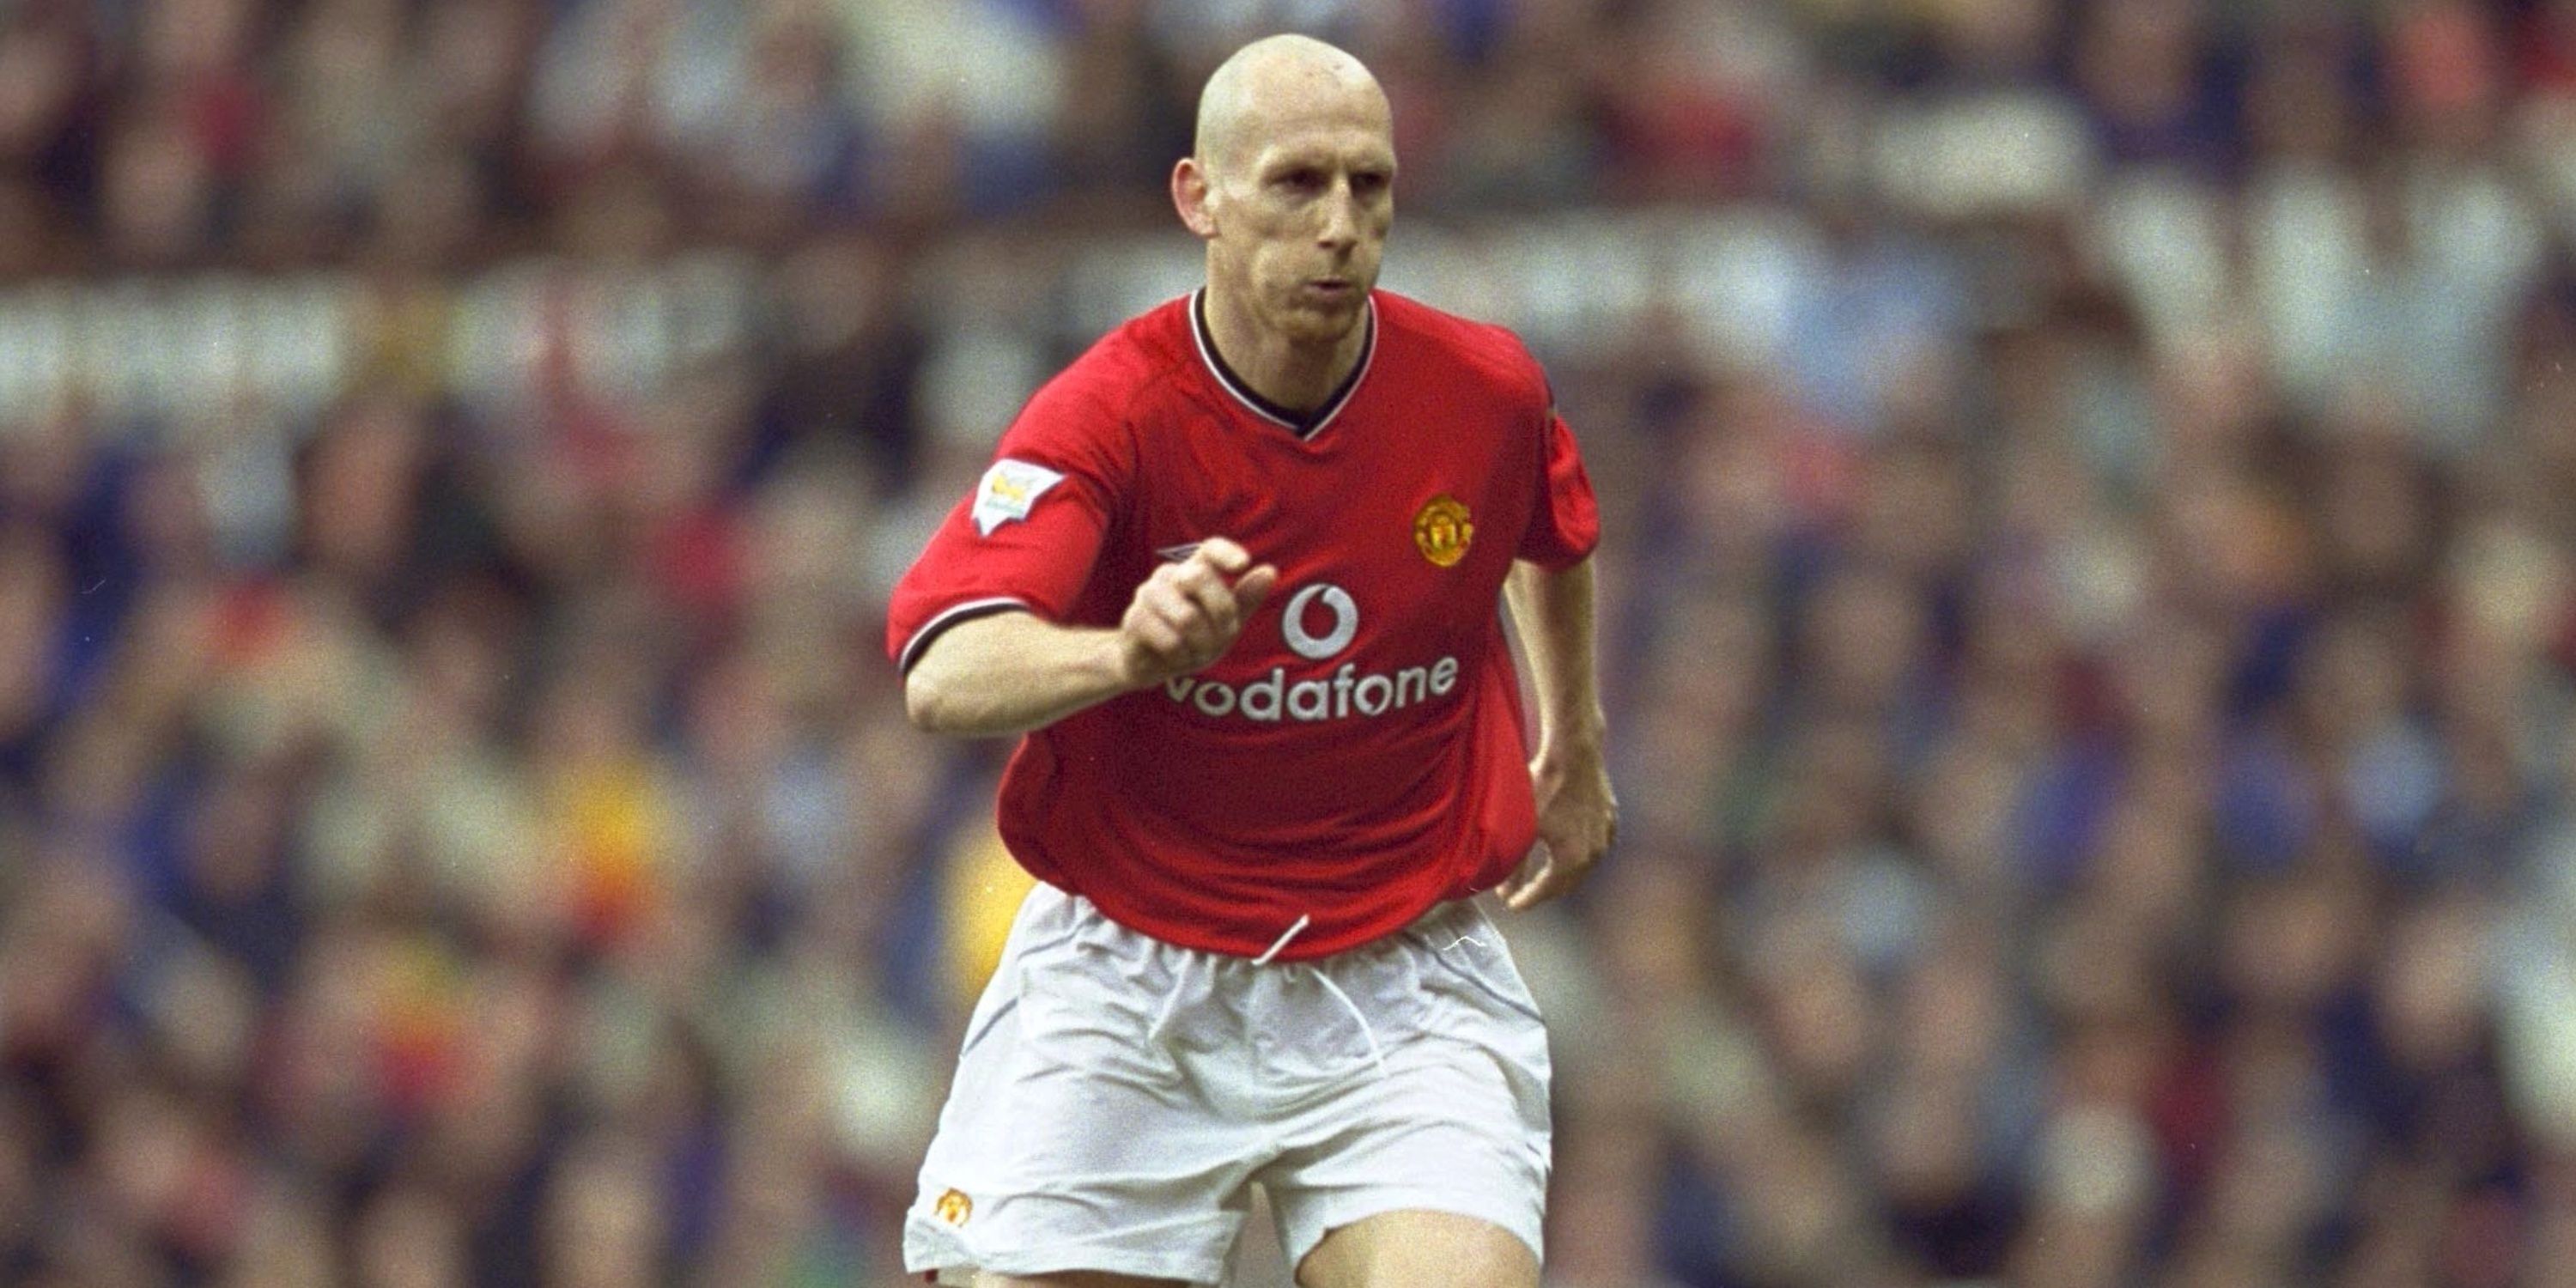 Jaap Stam in action for Manchester United.